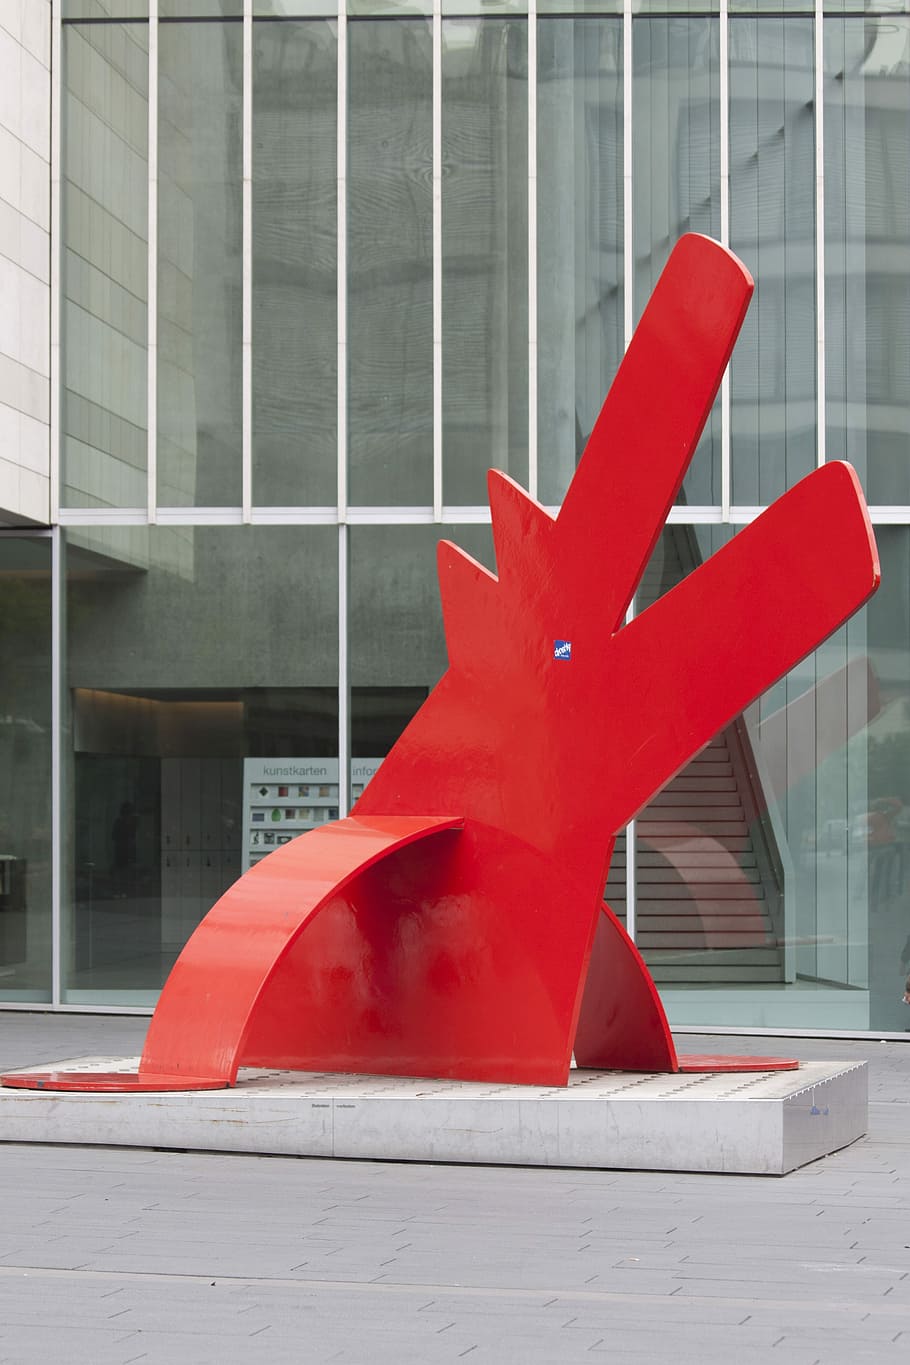 Artwork, Sculpture, Keith Haring, Dog, red dog, ulm, art, architecture, red, monument